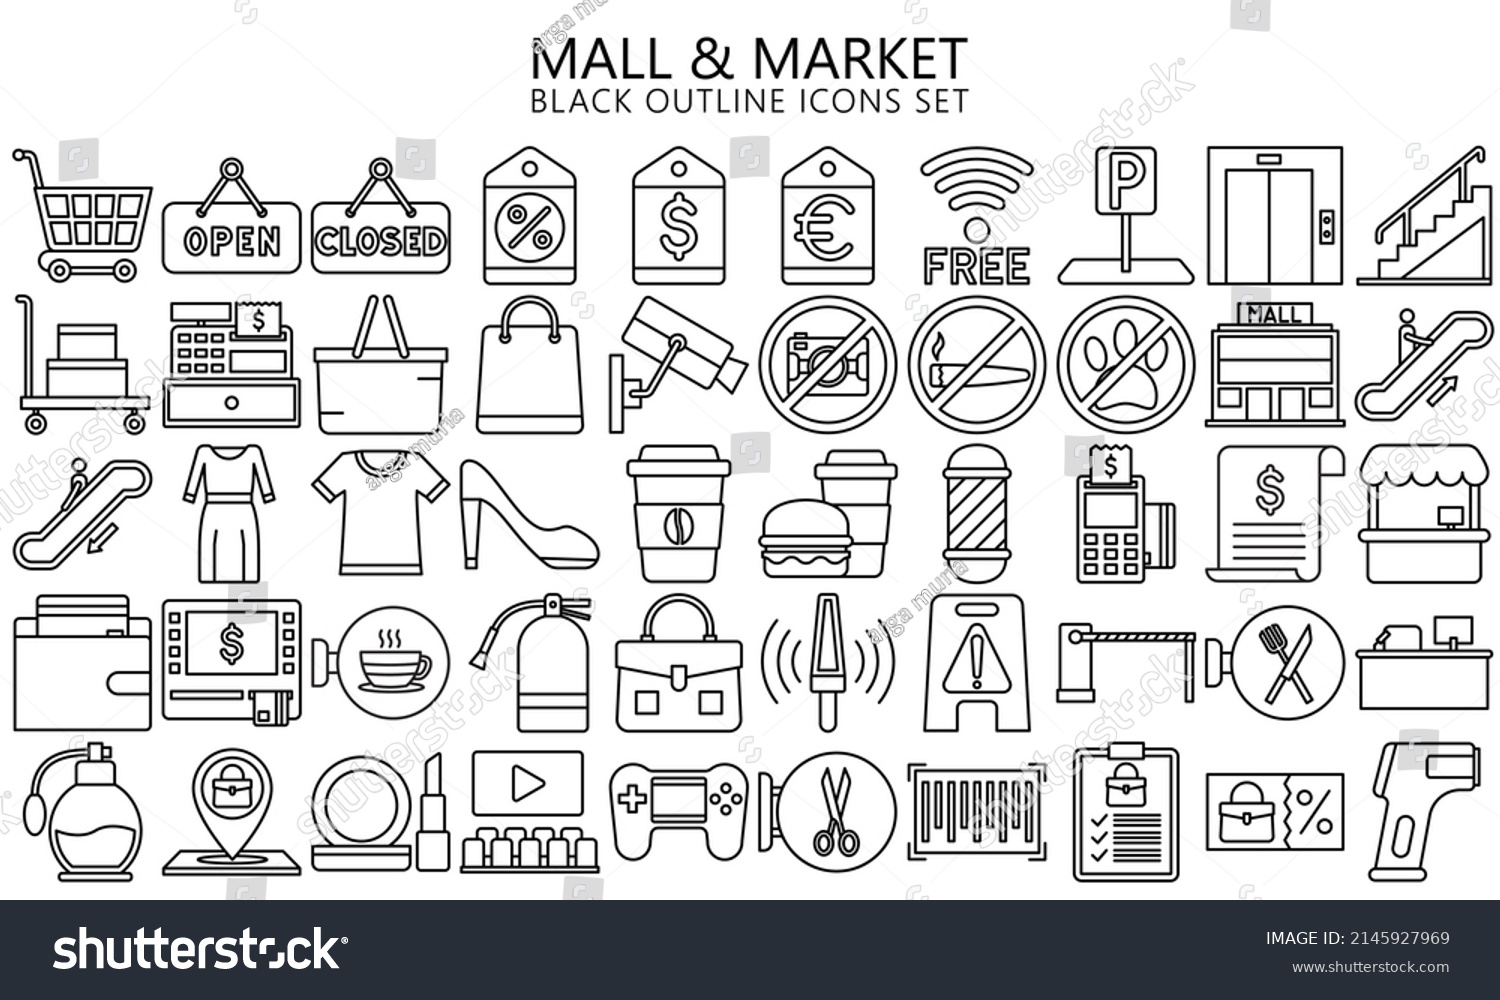 SVG of Market and Shopping mall, retail, minimal outline icon set with sale offer and payment symbols. Outline icons collection. Used for web, UI, UX kit and applications, vector EPS 10 ready convert to SVG svg